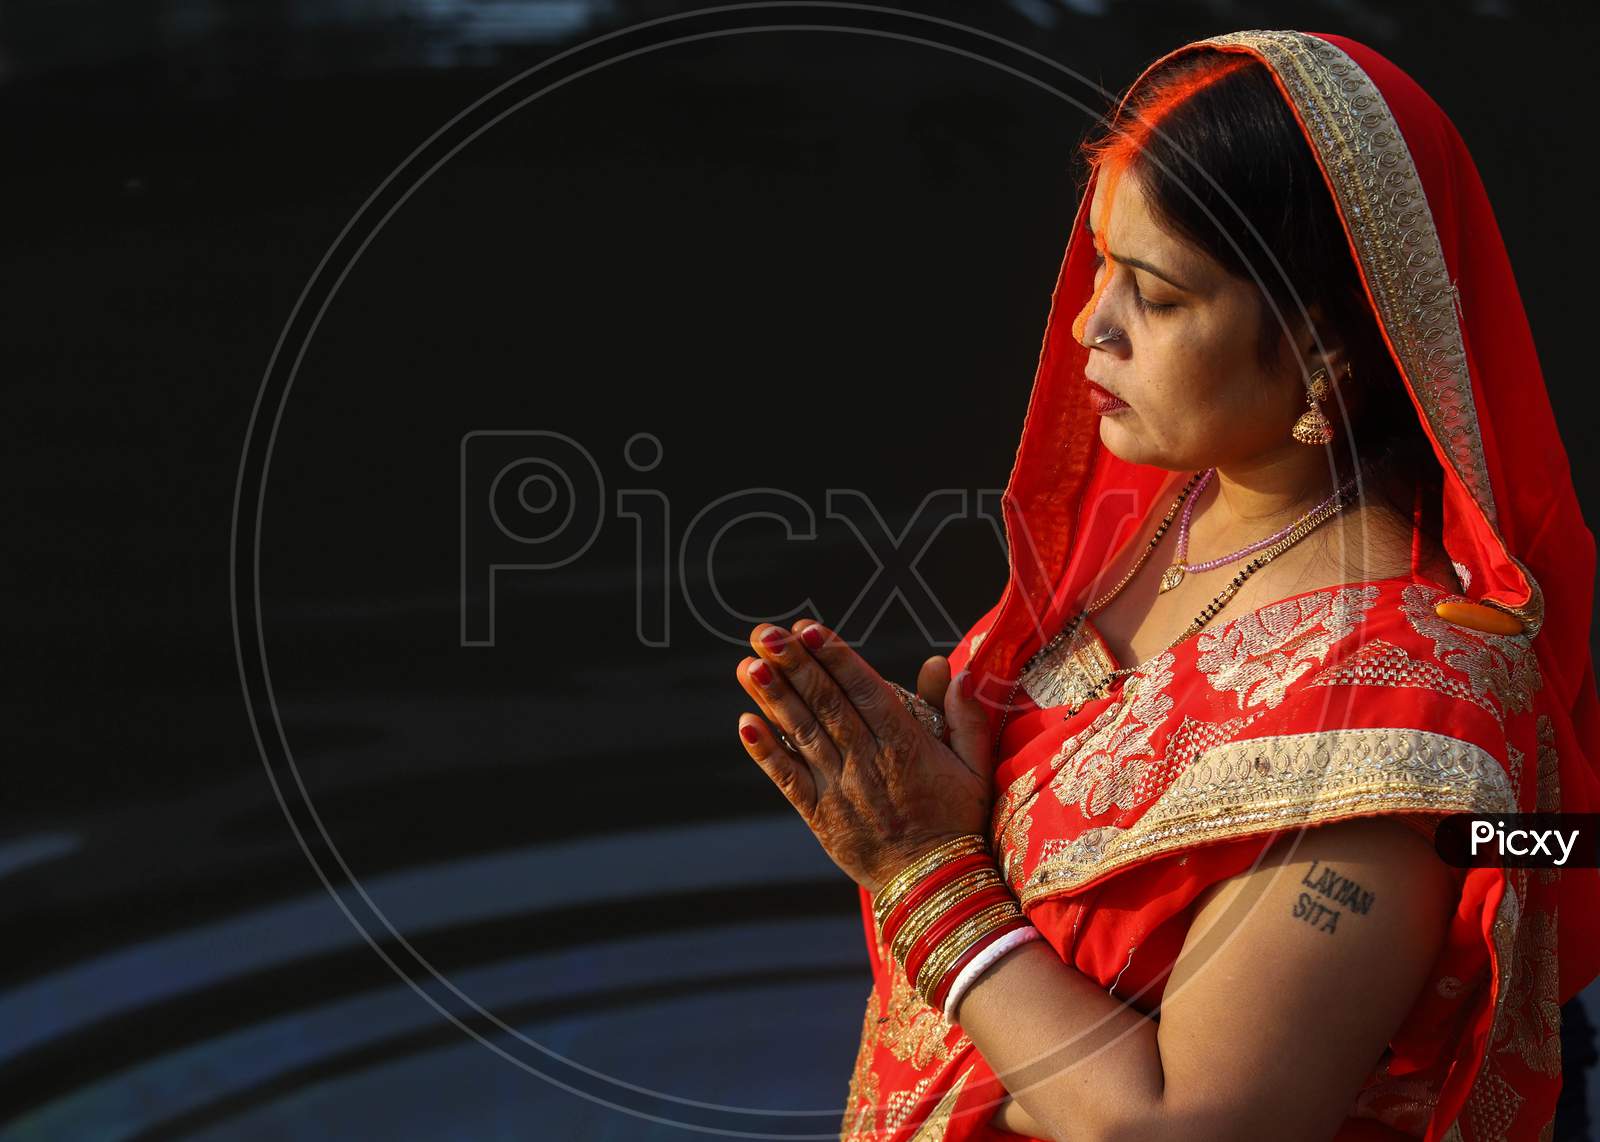 A Hindu devotee performs rituals during the Chhath festival in New Delhi- Ghaziabad border on November 20, 2020.